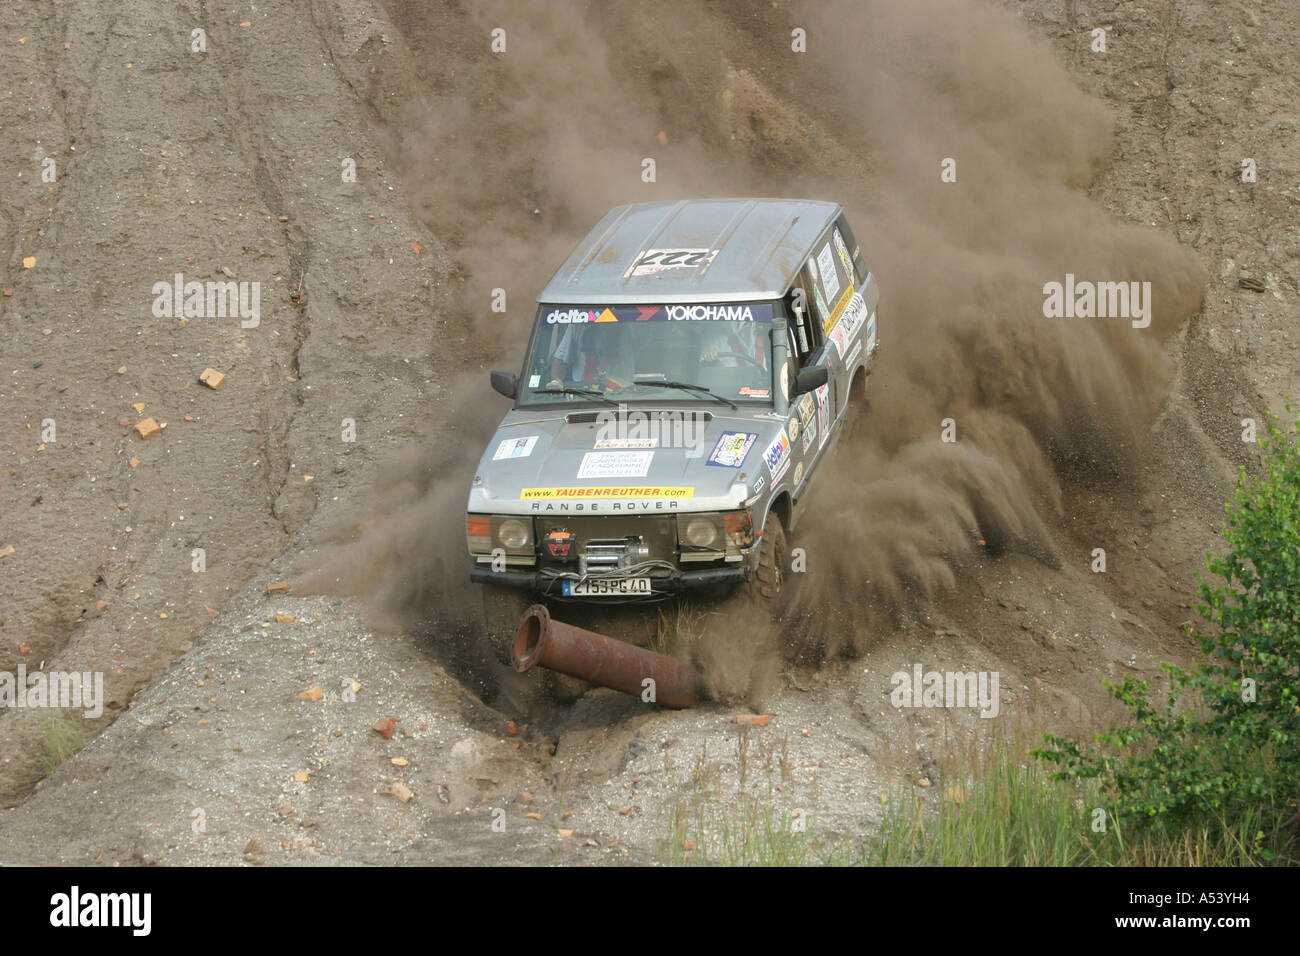 Range Rover 4x4 car dives with speed against a steel pipe or steel tube Stock Photo